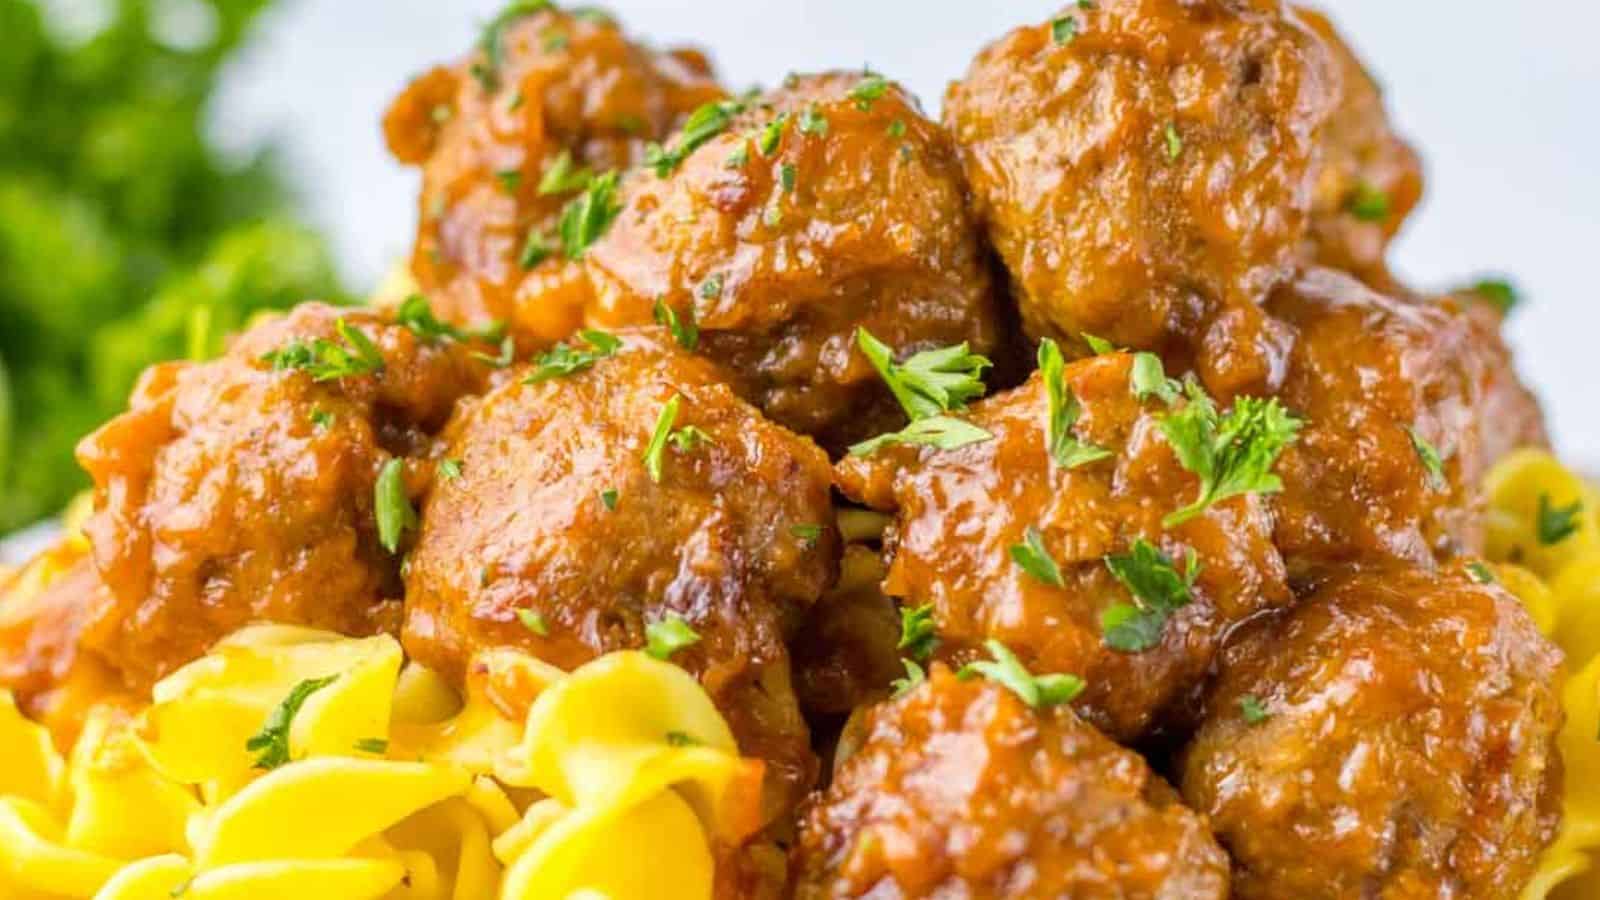 A close-up of saucy Salisbury steak meatballs served on a bed of egg noodles, garnished with chopped fresh herbs.